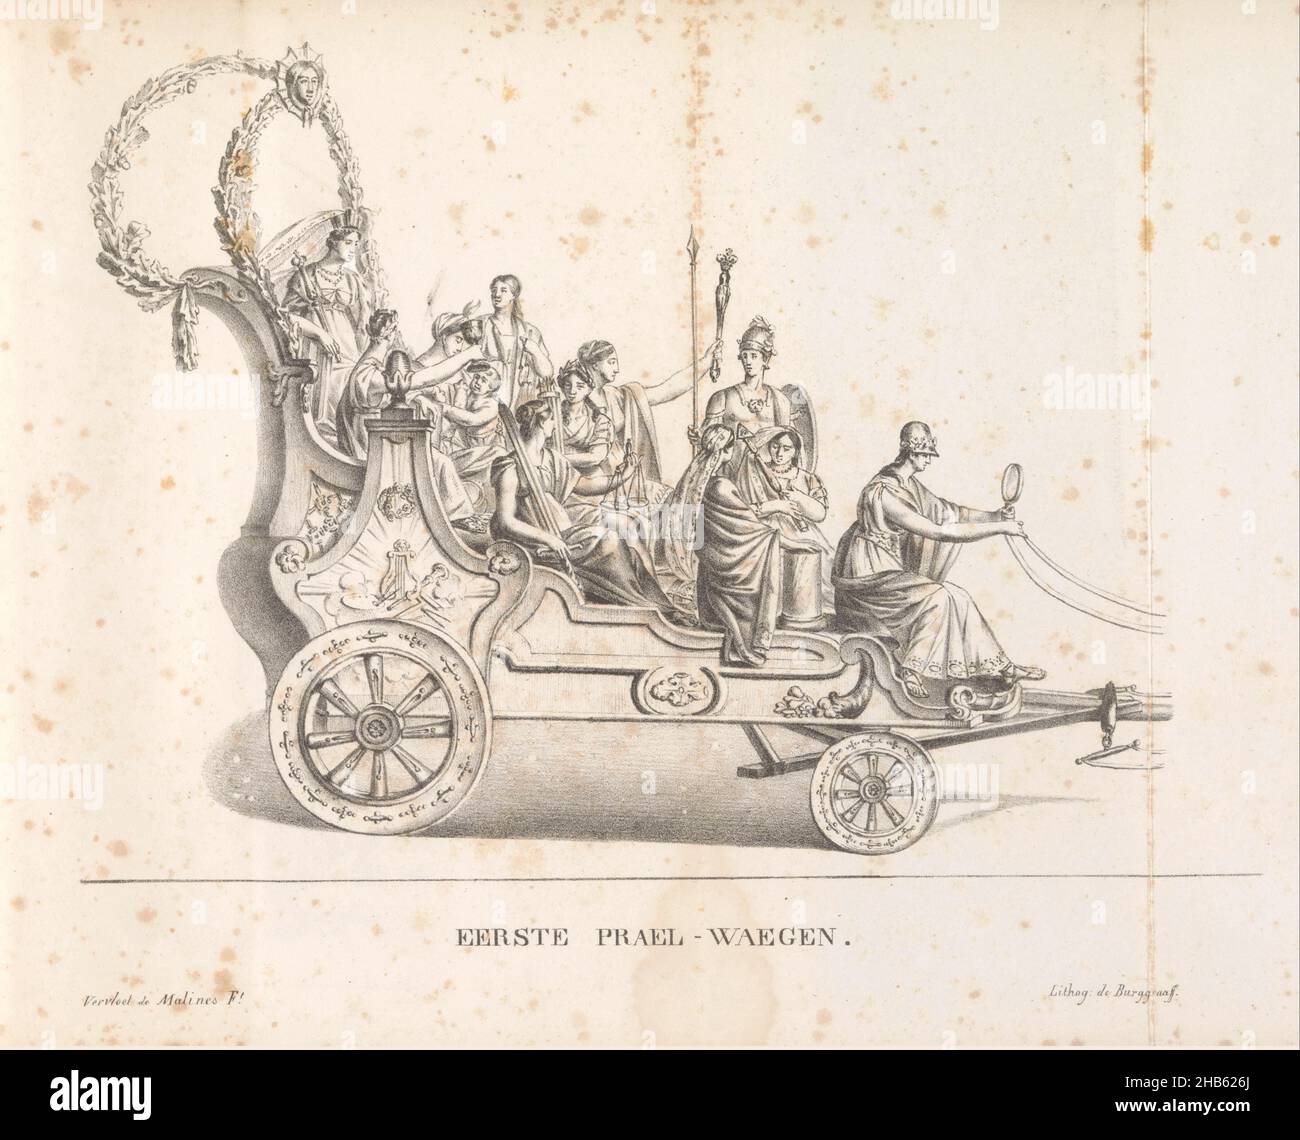 First float in the procession for Saint Rombout, 1825, Eerste Prael-waegen (title on object), The first float in the procession for Saint Rombout. On the float the city virgin of Mechelen accompanied by Virtues. The procession was held on 28 June, 5 and 12 July 1825. Illustration in a publication to mark the 50th anniversary in 1825 of the jubilee of Saint Rumoldus or Rombout, patron saint of the city of Mechelen., print maker: Frans Vervloet (mentioned on object), printer: Burggraaff (mentioned on object), print maker: Mechelen, printer: Brussels, publisher: Mechelen, 1825, paper, height 210 Stock Photo